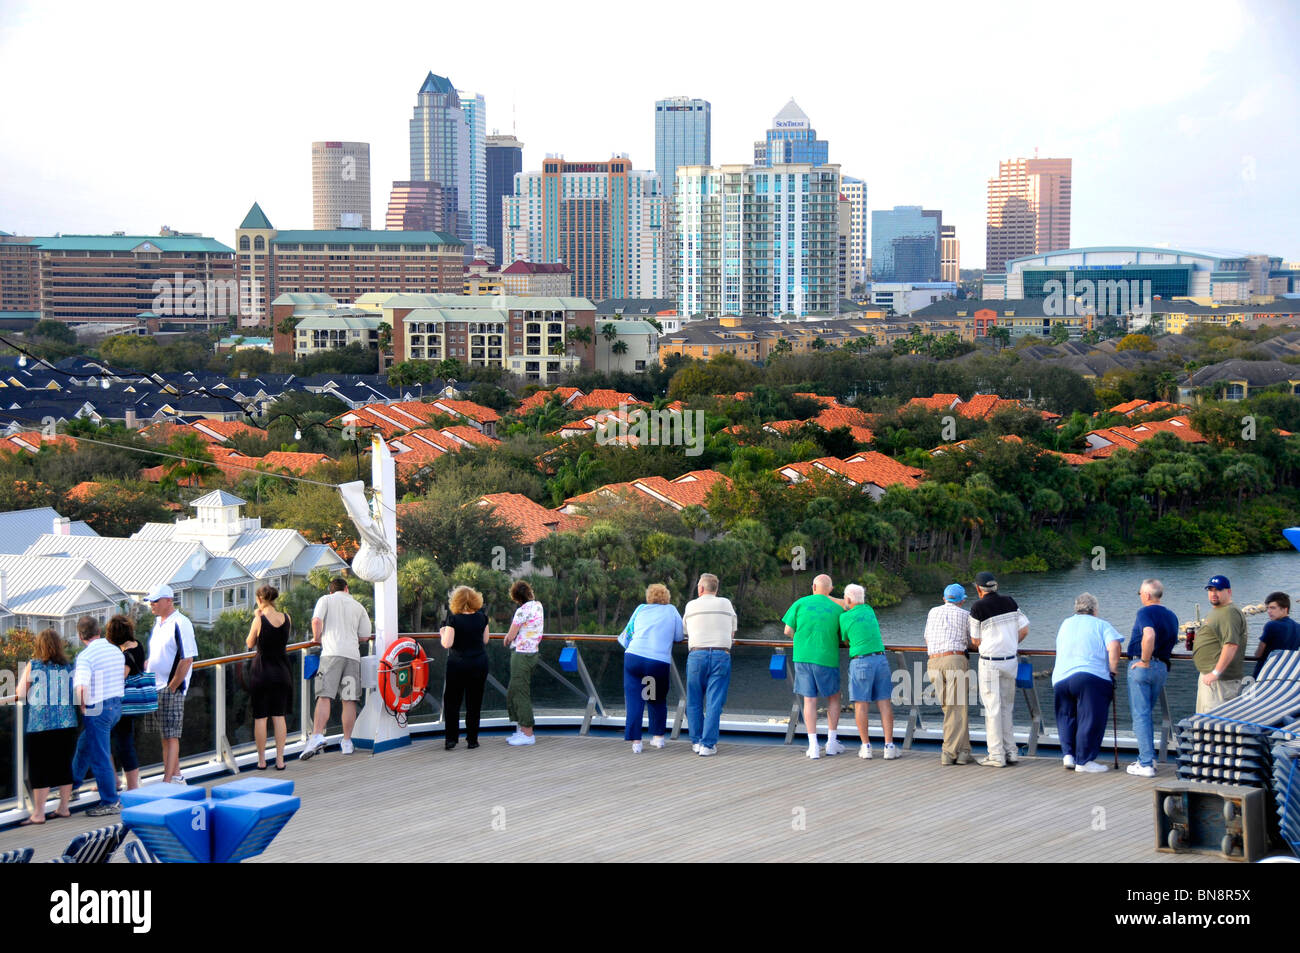 People viewing Downtown Tampa Bay Florida Skyline and homes from Cruise Ship Stock Photo